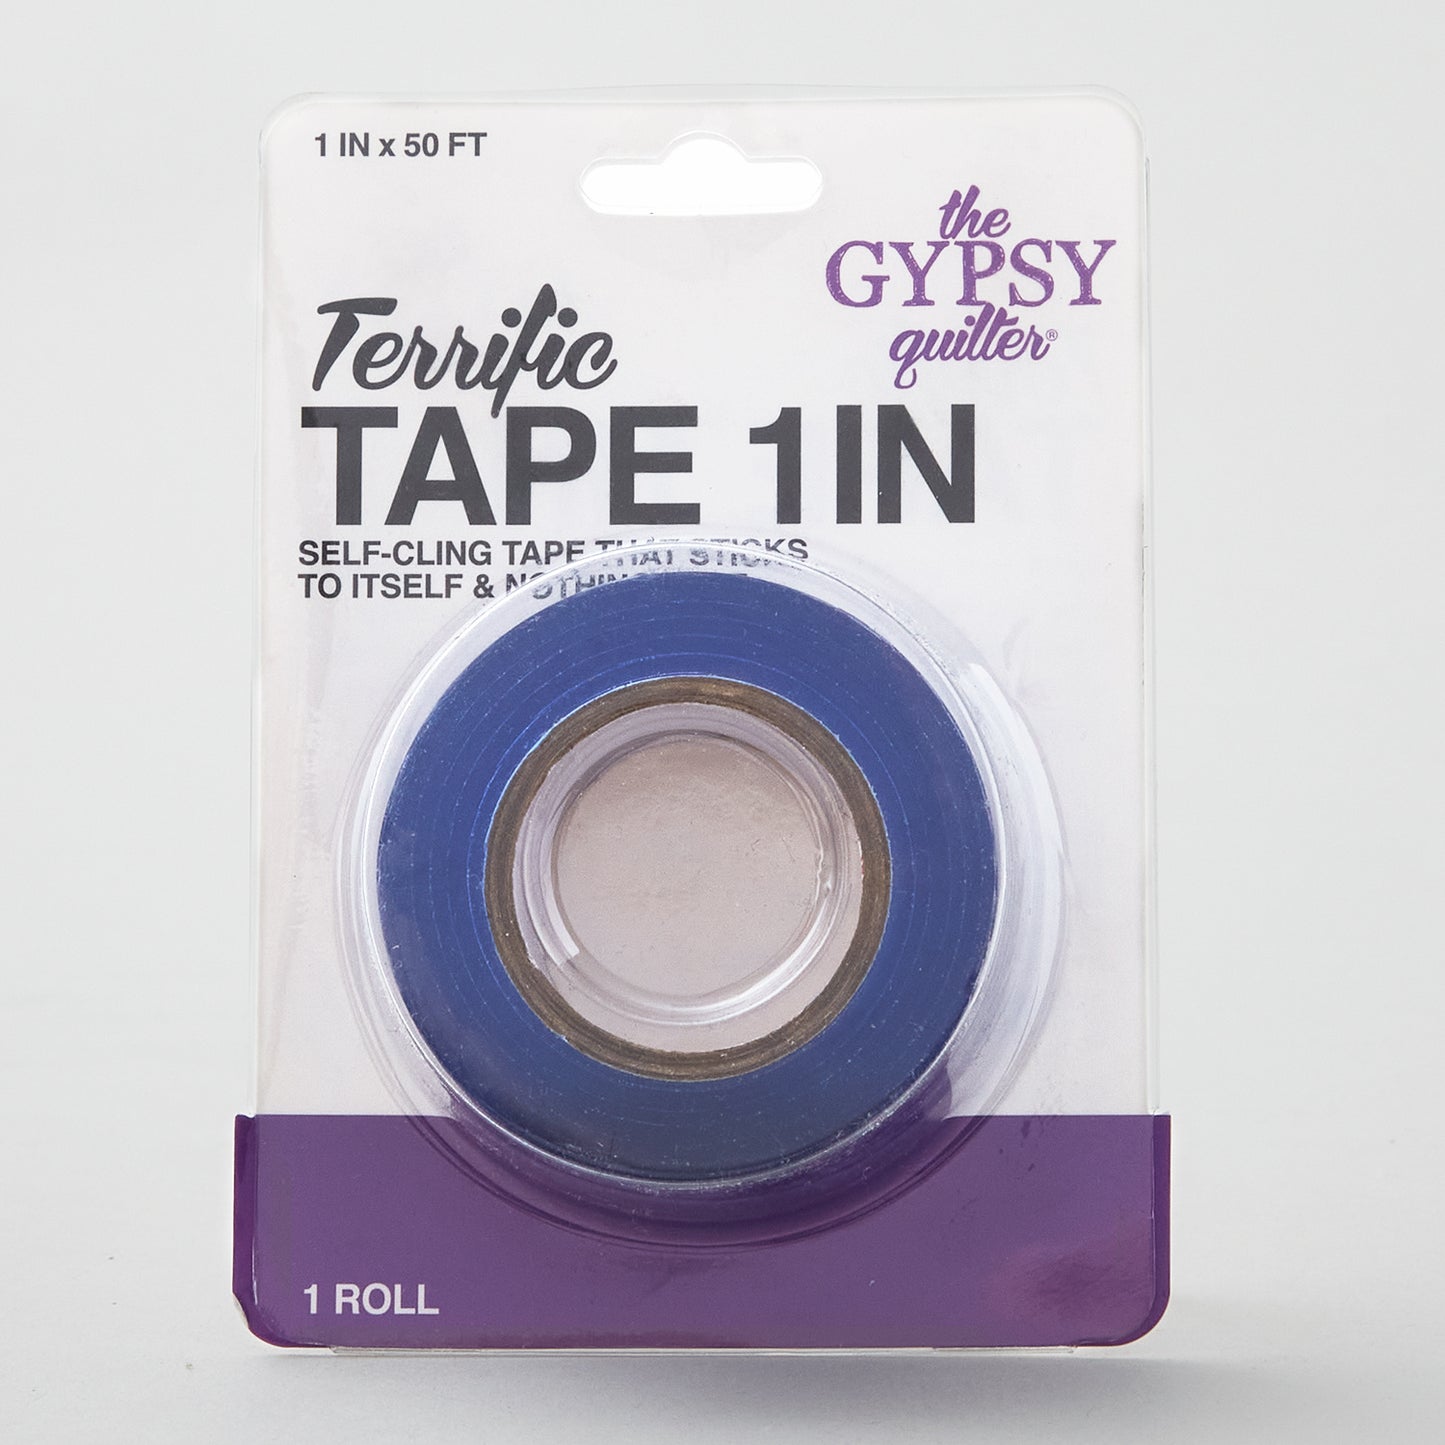 The Gypsy Quilter Terrific Tape 1" Alternative View #1